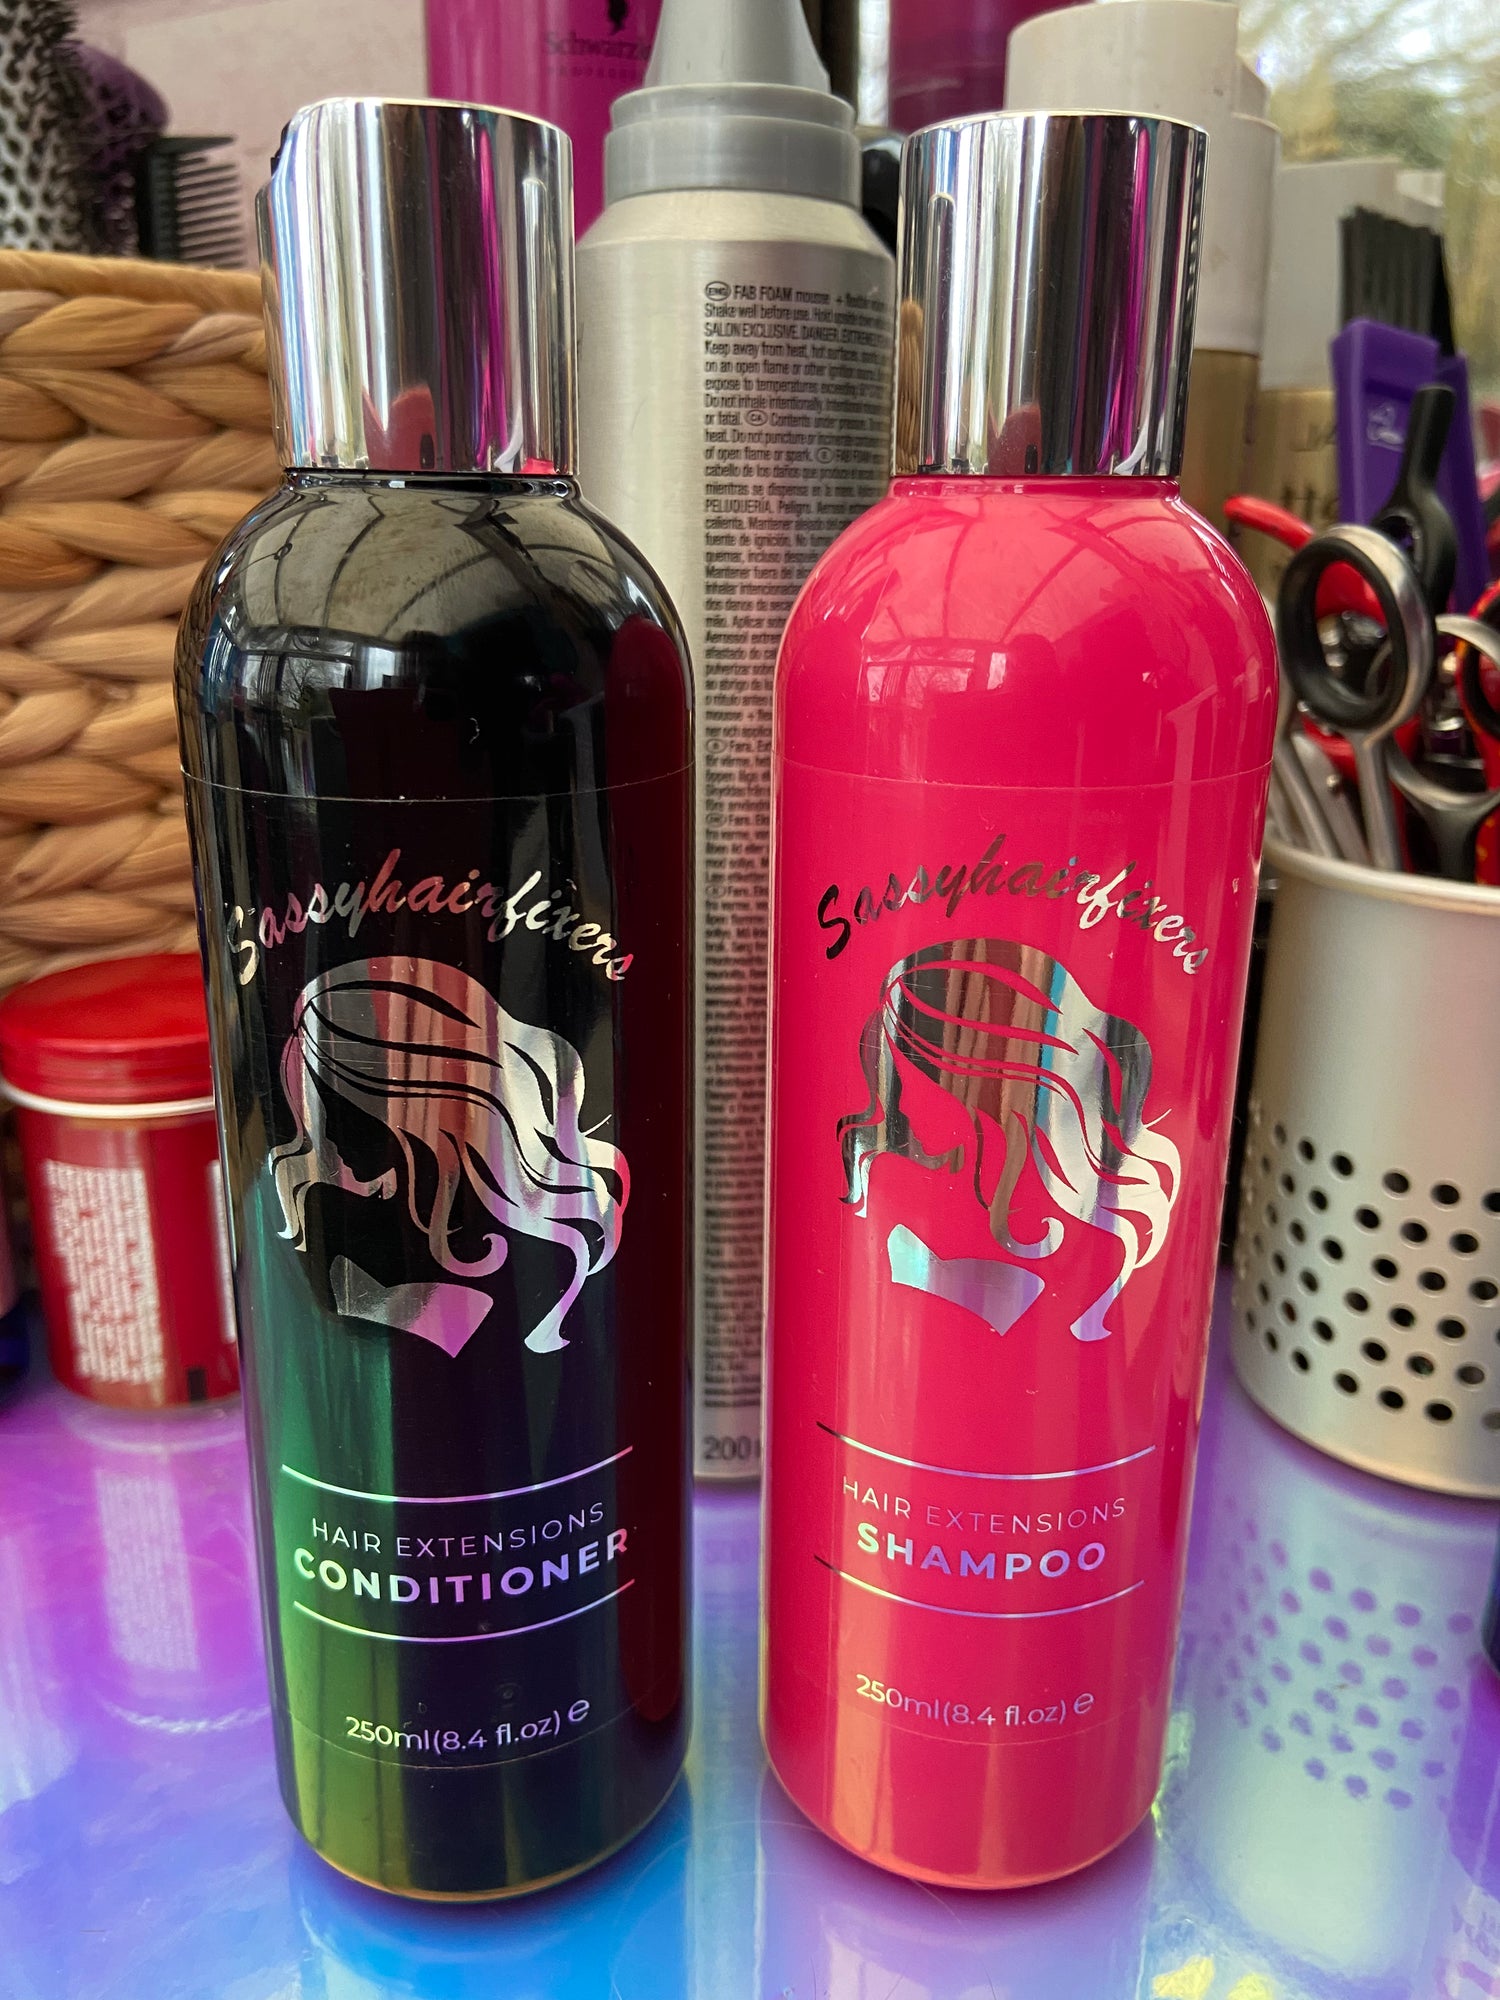 Sassyhairfixers Hair extensions Shampoo and conditioner Duo